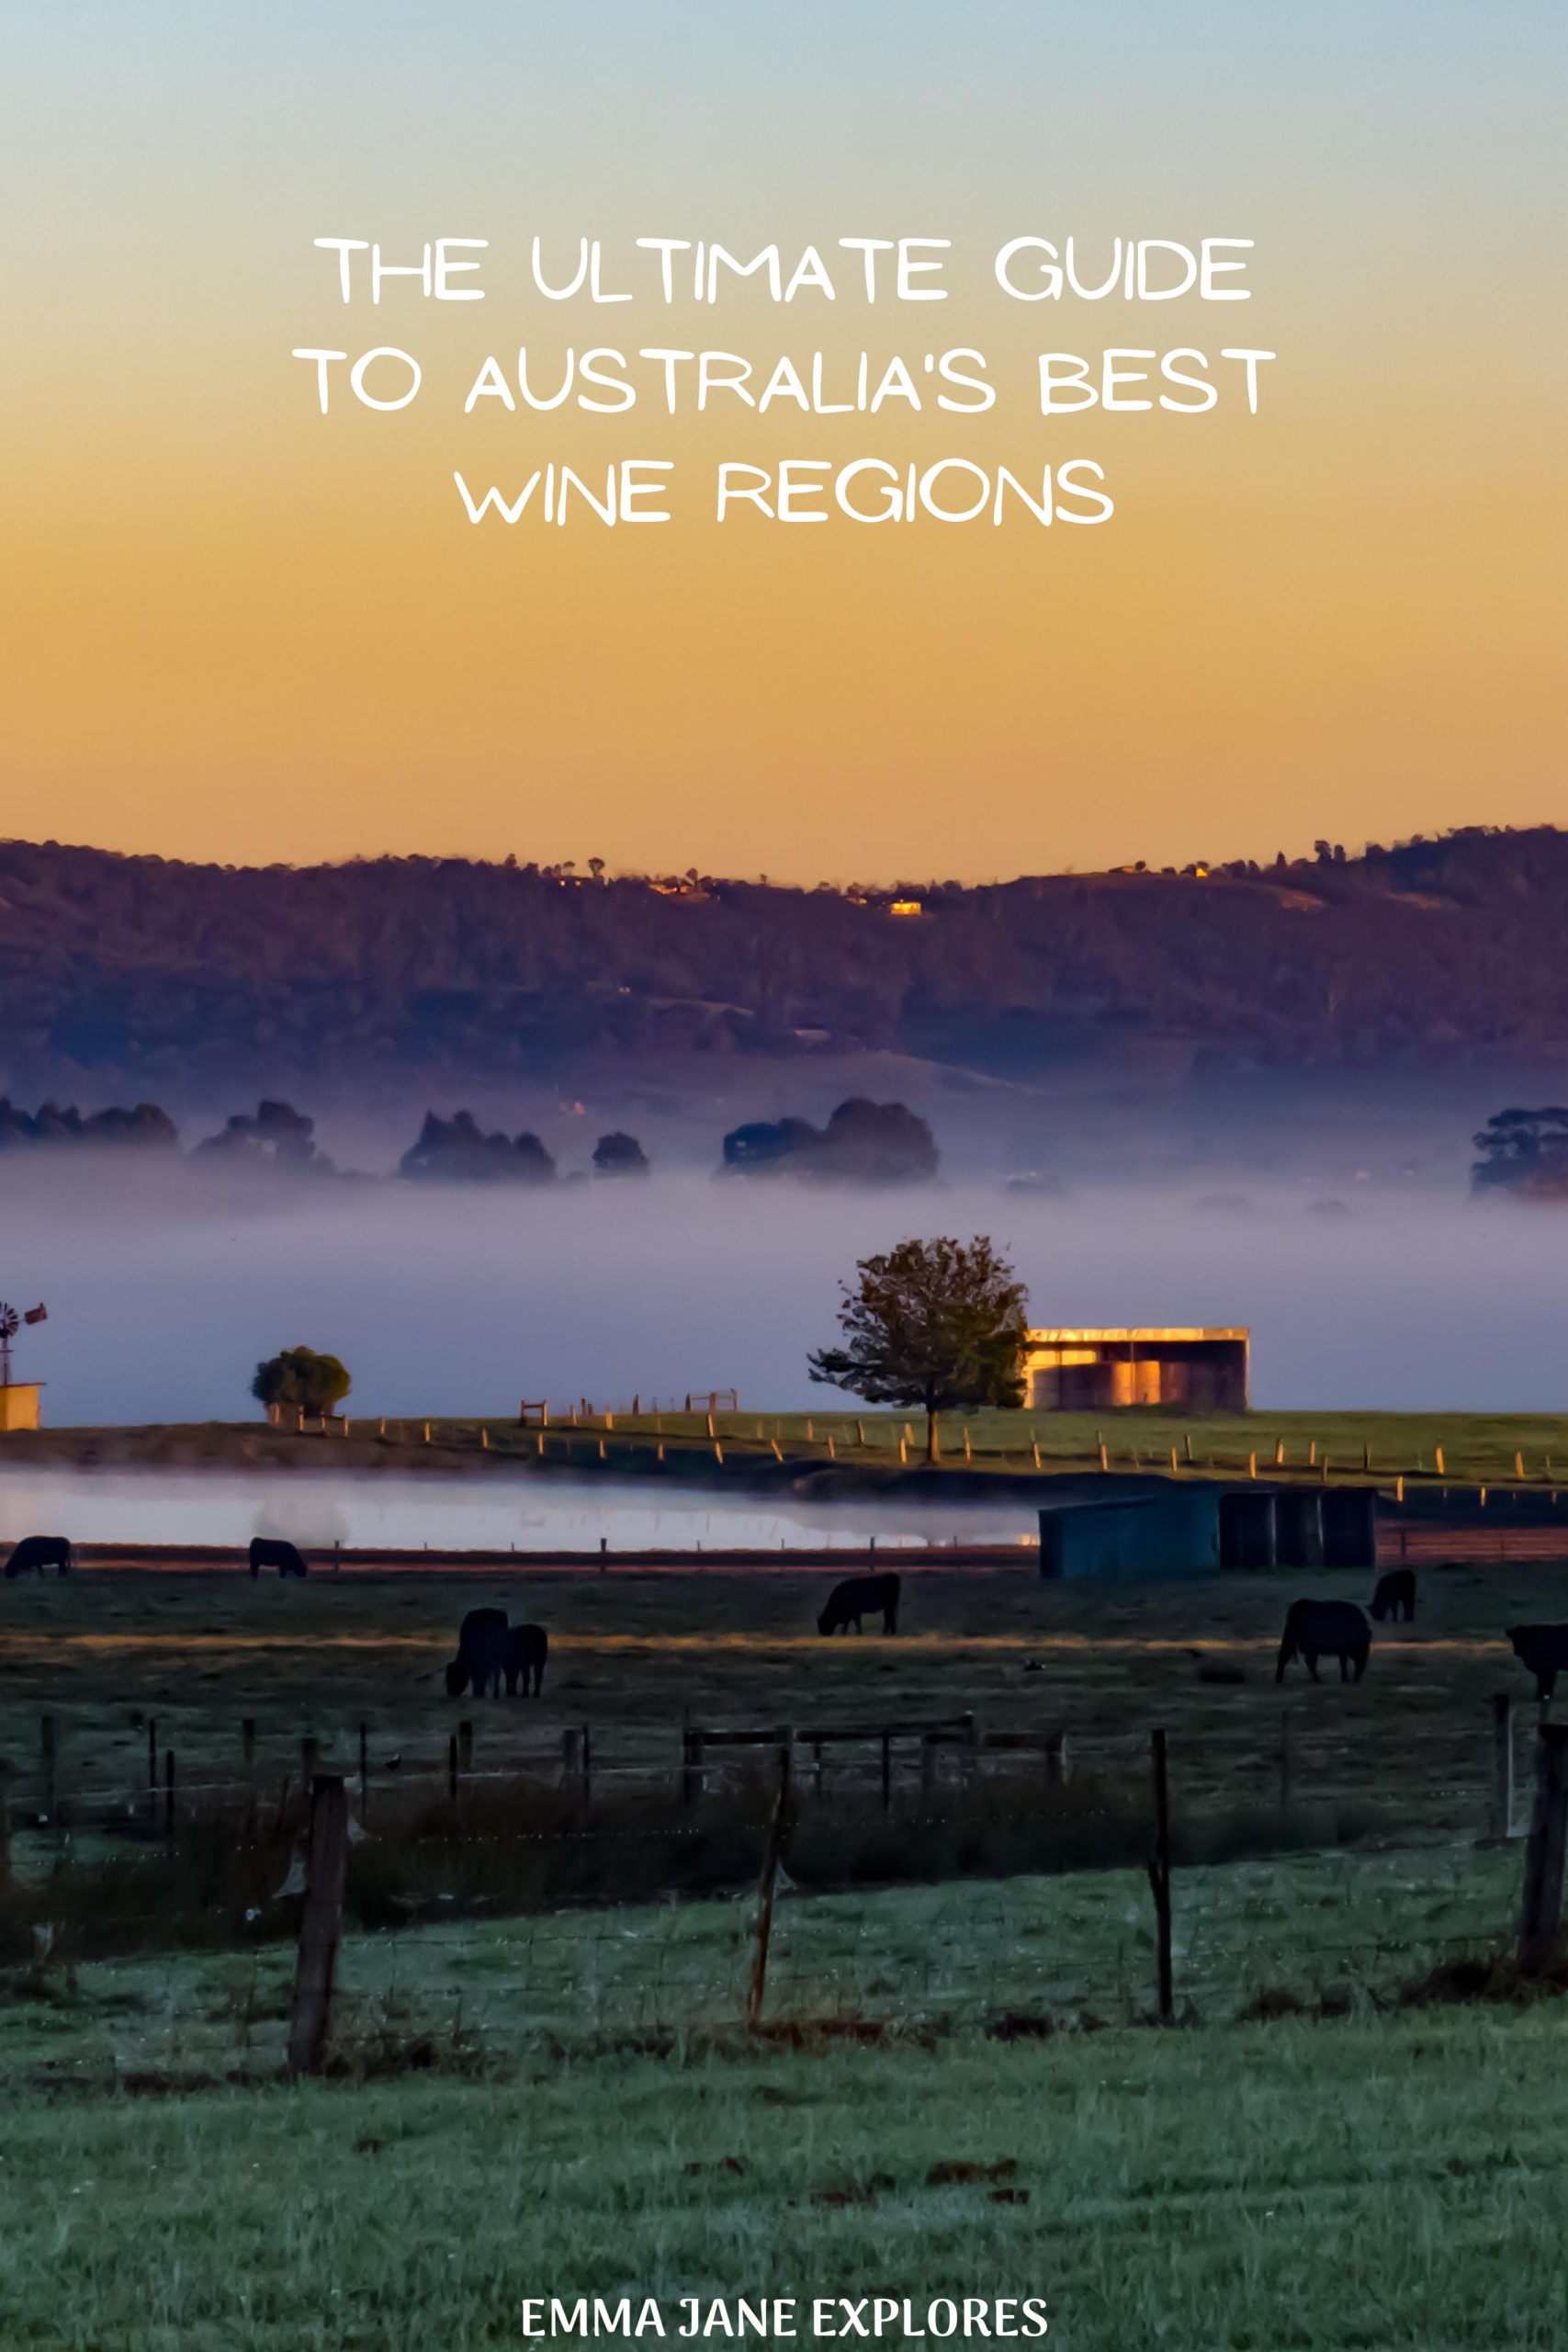 The Ultimate Guide to Australia's Best Wine Regions -Emma Jane Explores